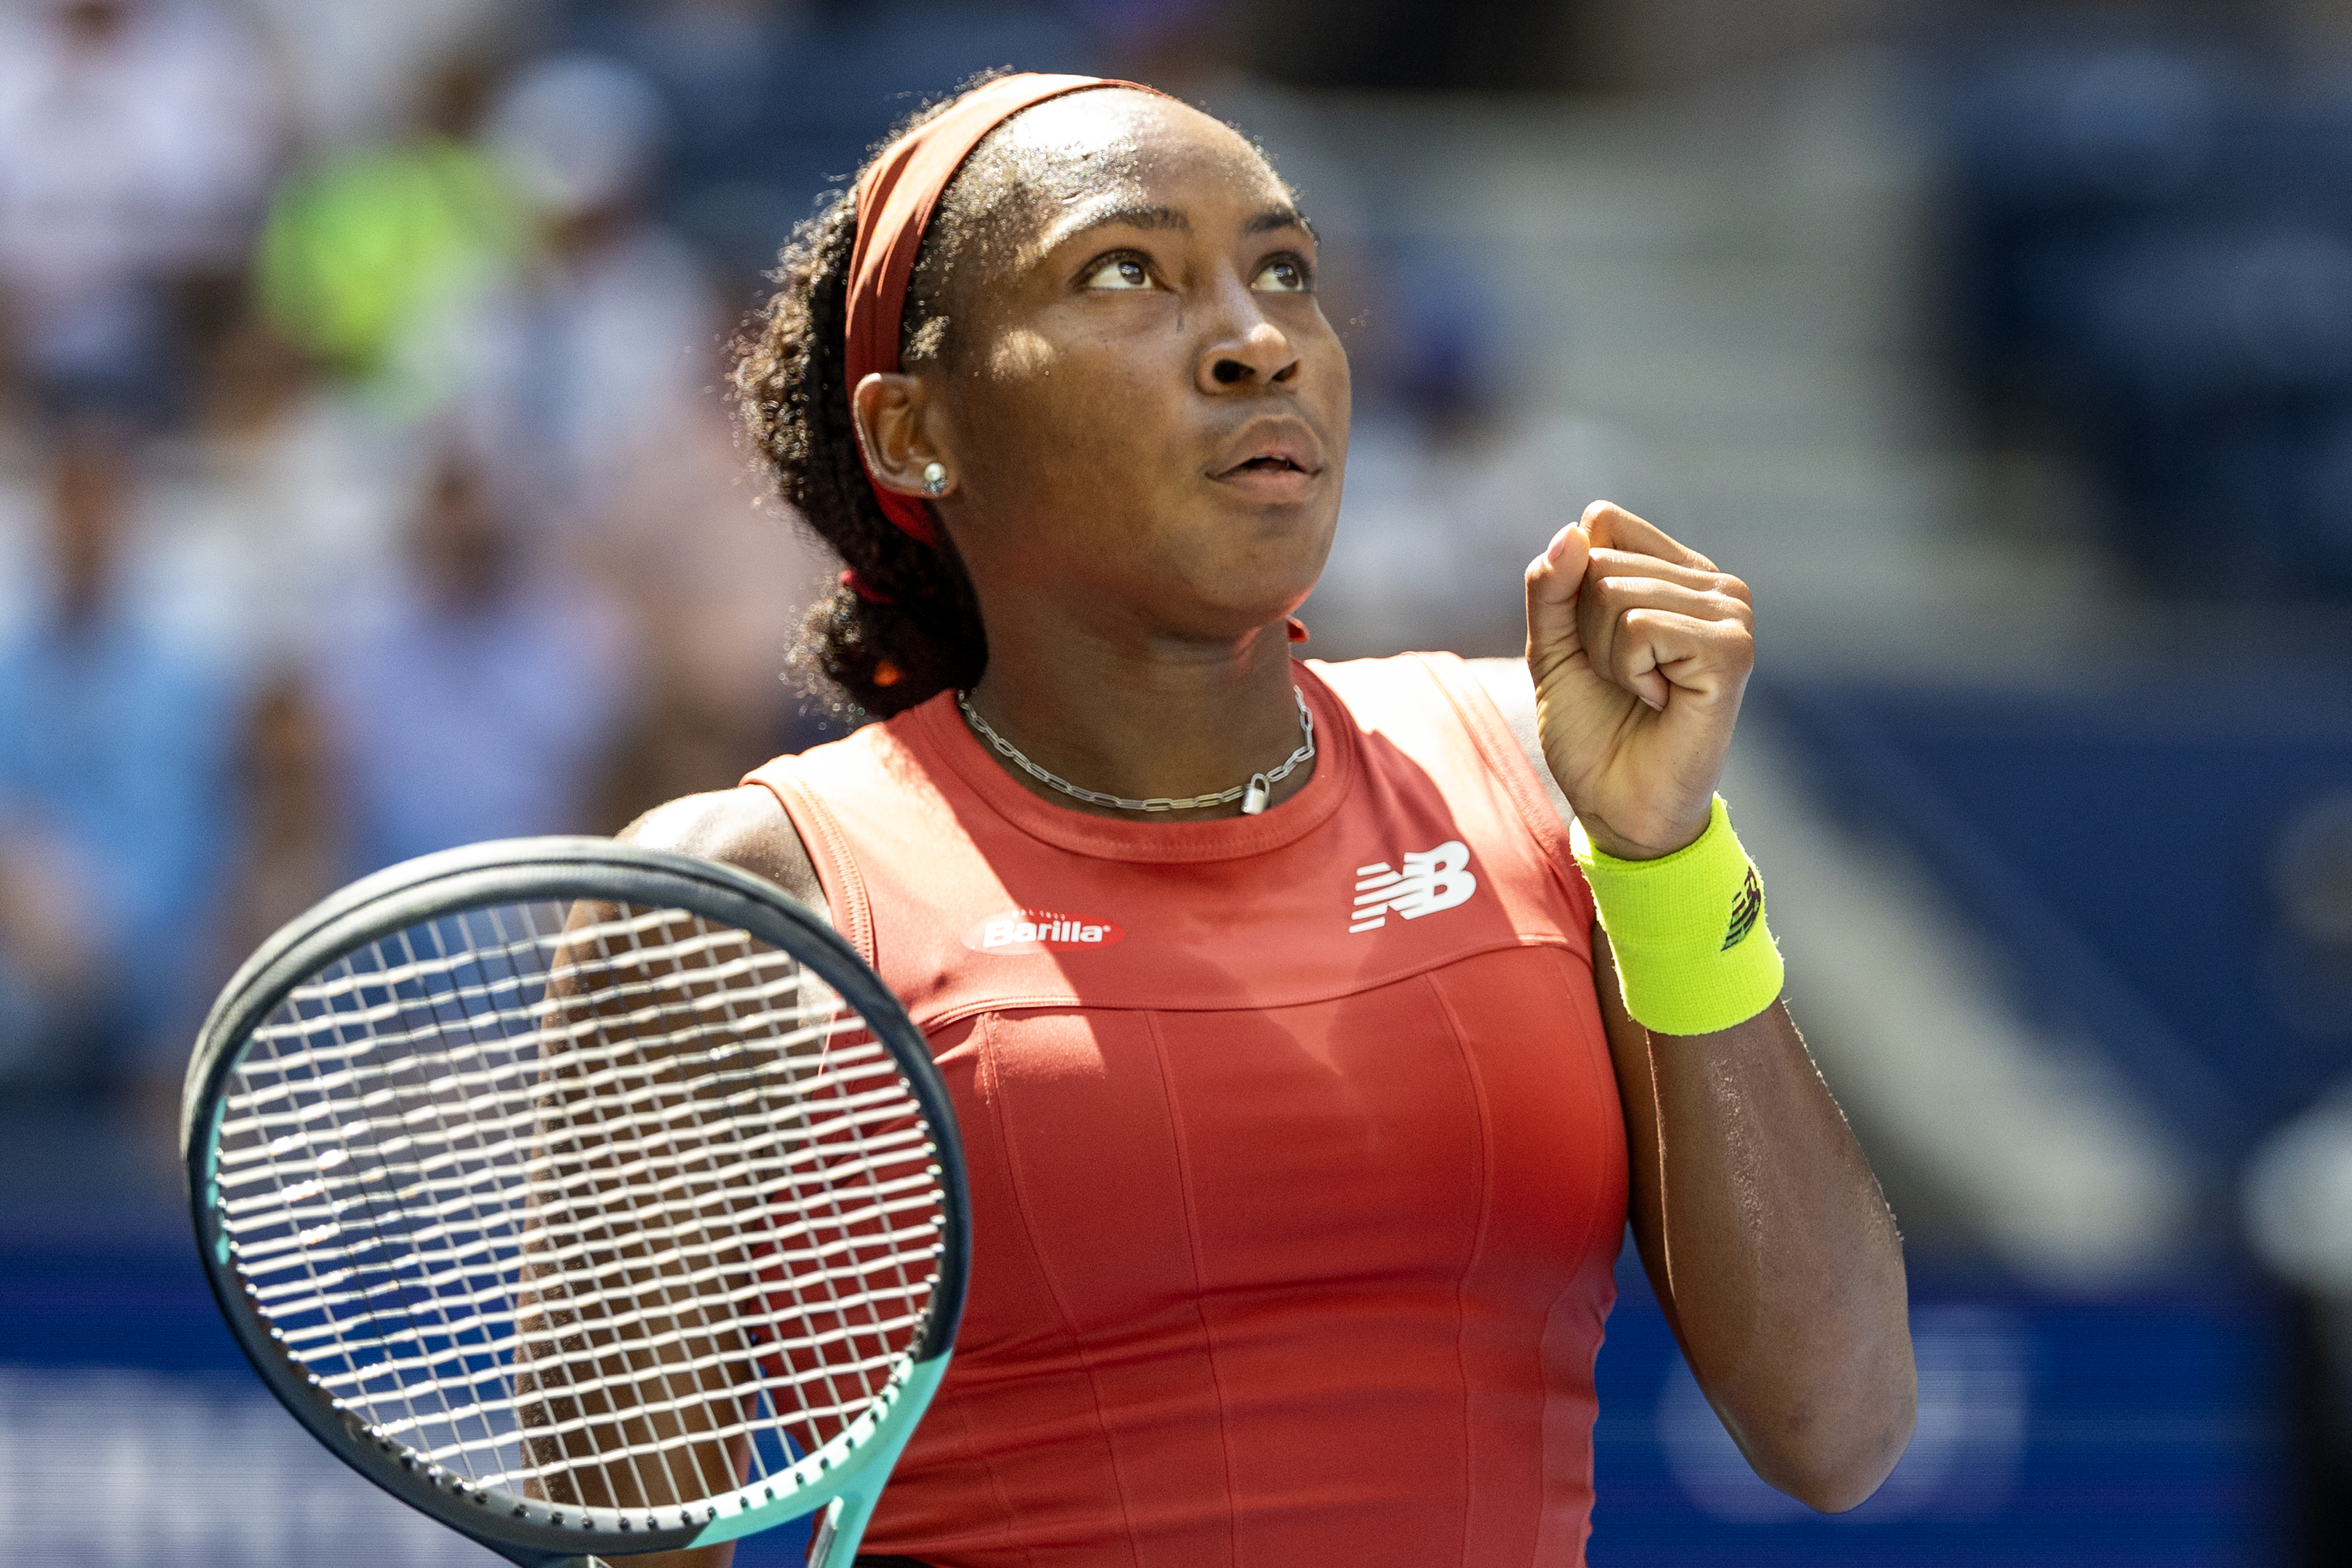 Coco Gauff of the United States during her match against Mirra Andreeva of Russia in the Women’s Singles round two match on Arthur Ashe Stadium during the US Open Tennis Championship 2023 at the USTA National Tennis Centre on August 30th, 2023 in Flushing, Queens, New York City.